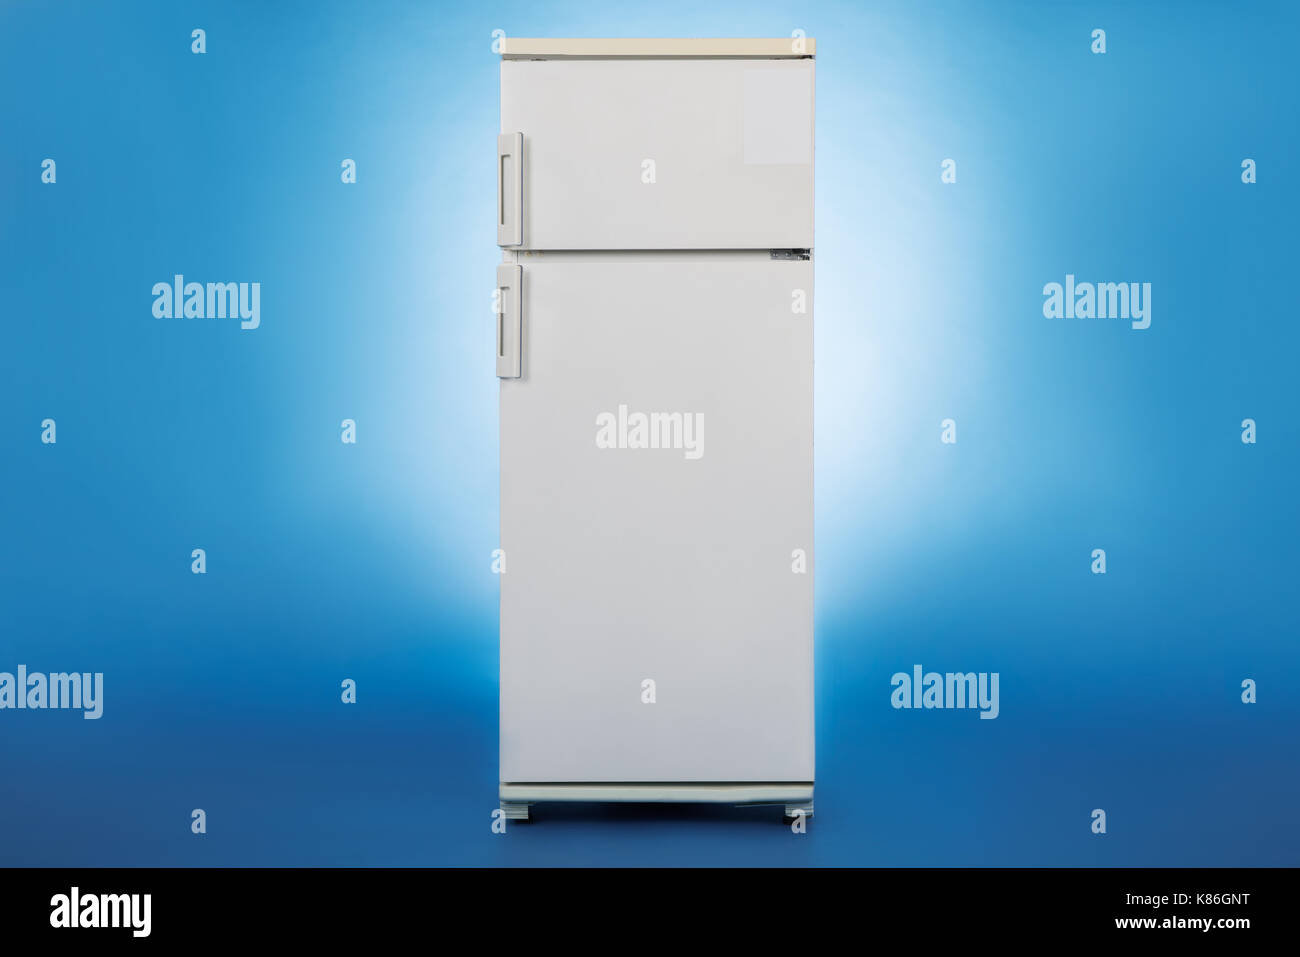 Photo of closed refrigerator isolated over blue background Stock Photo